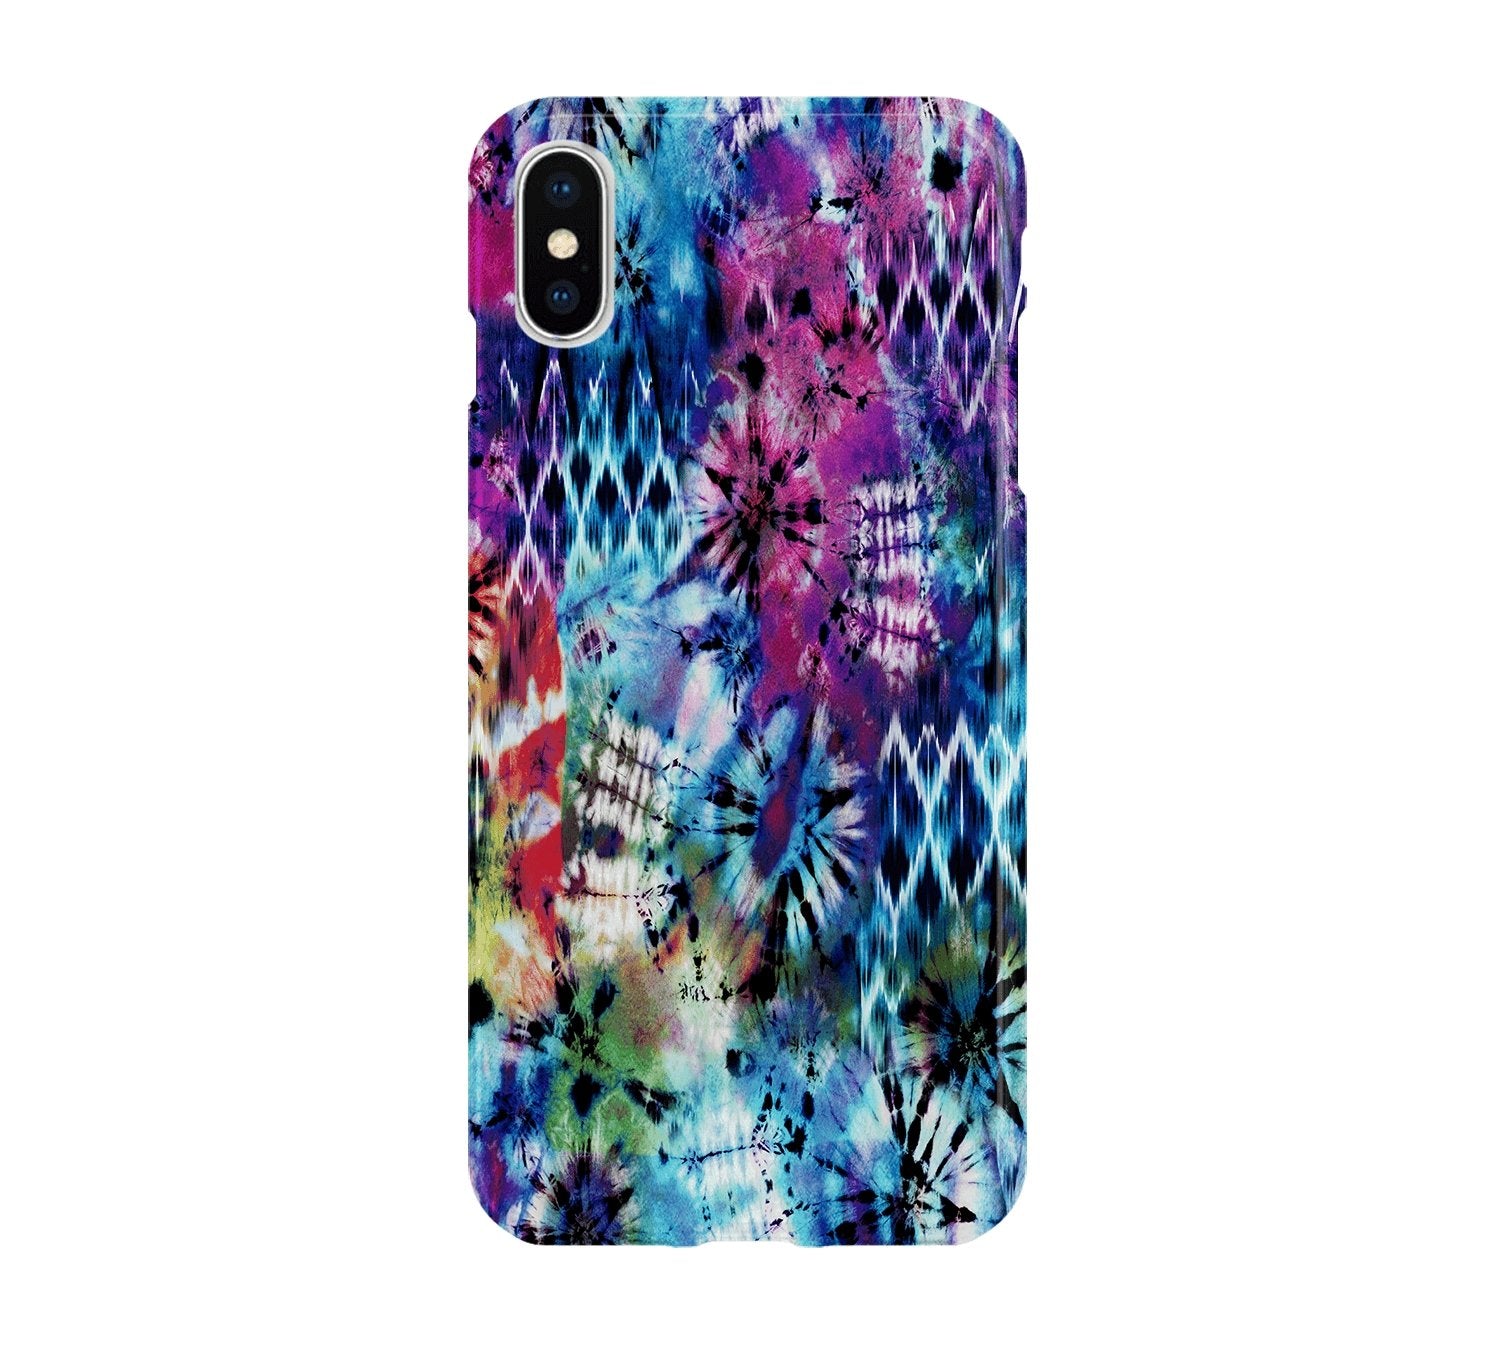 Chaos Tie Dye - iPhone phone case designs by CaseSwagger